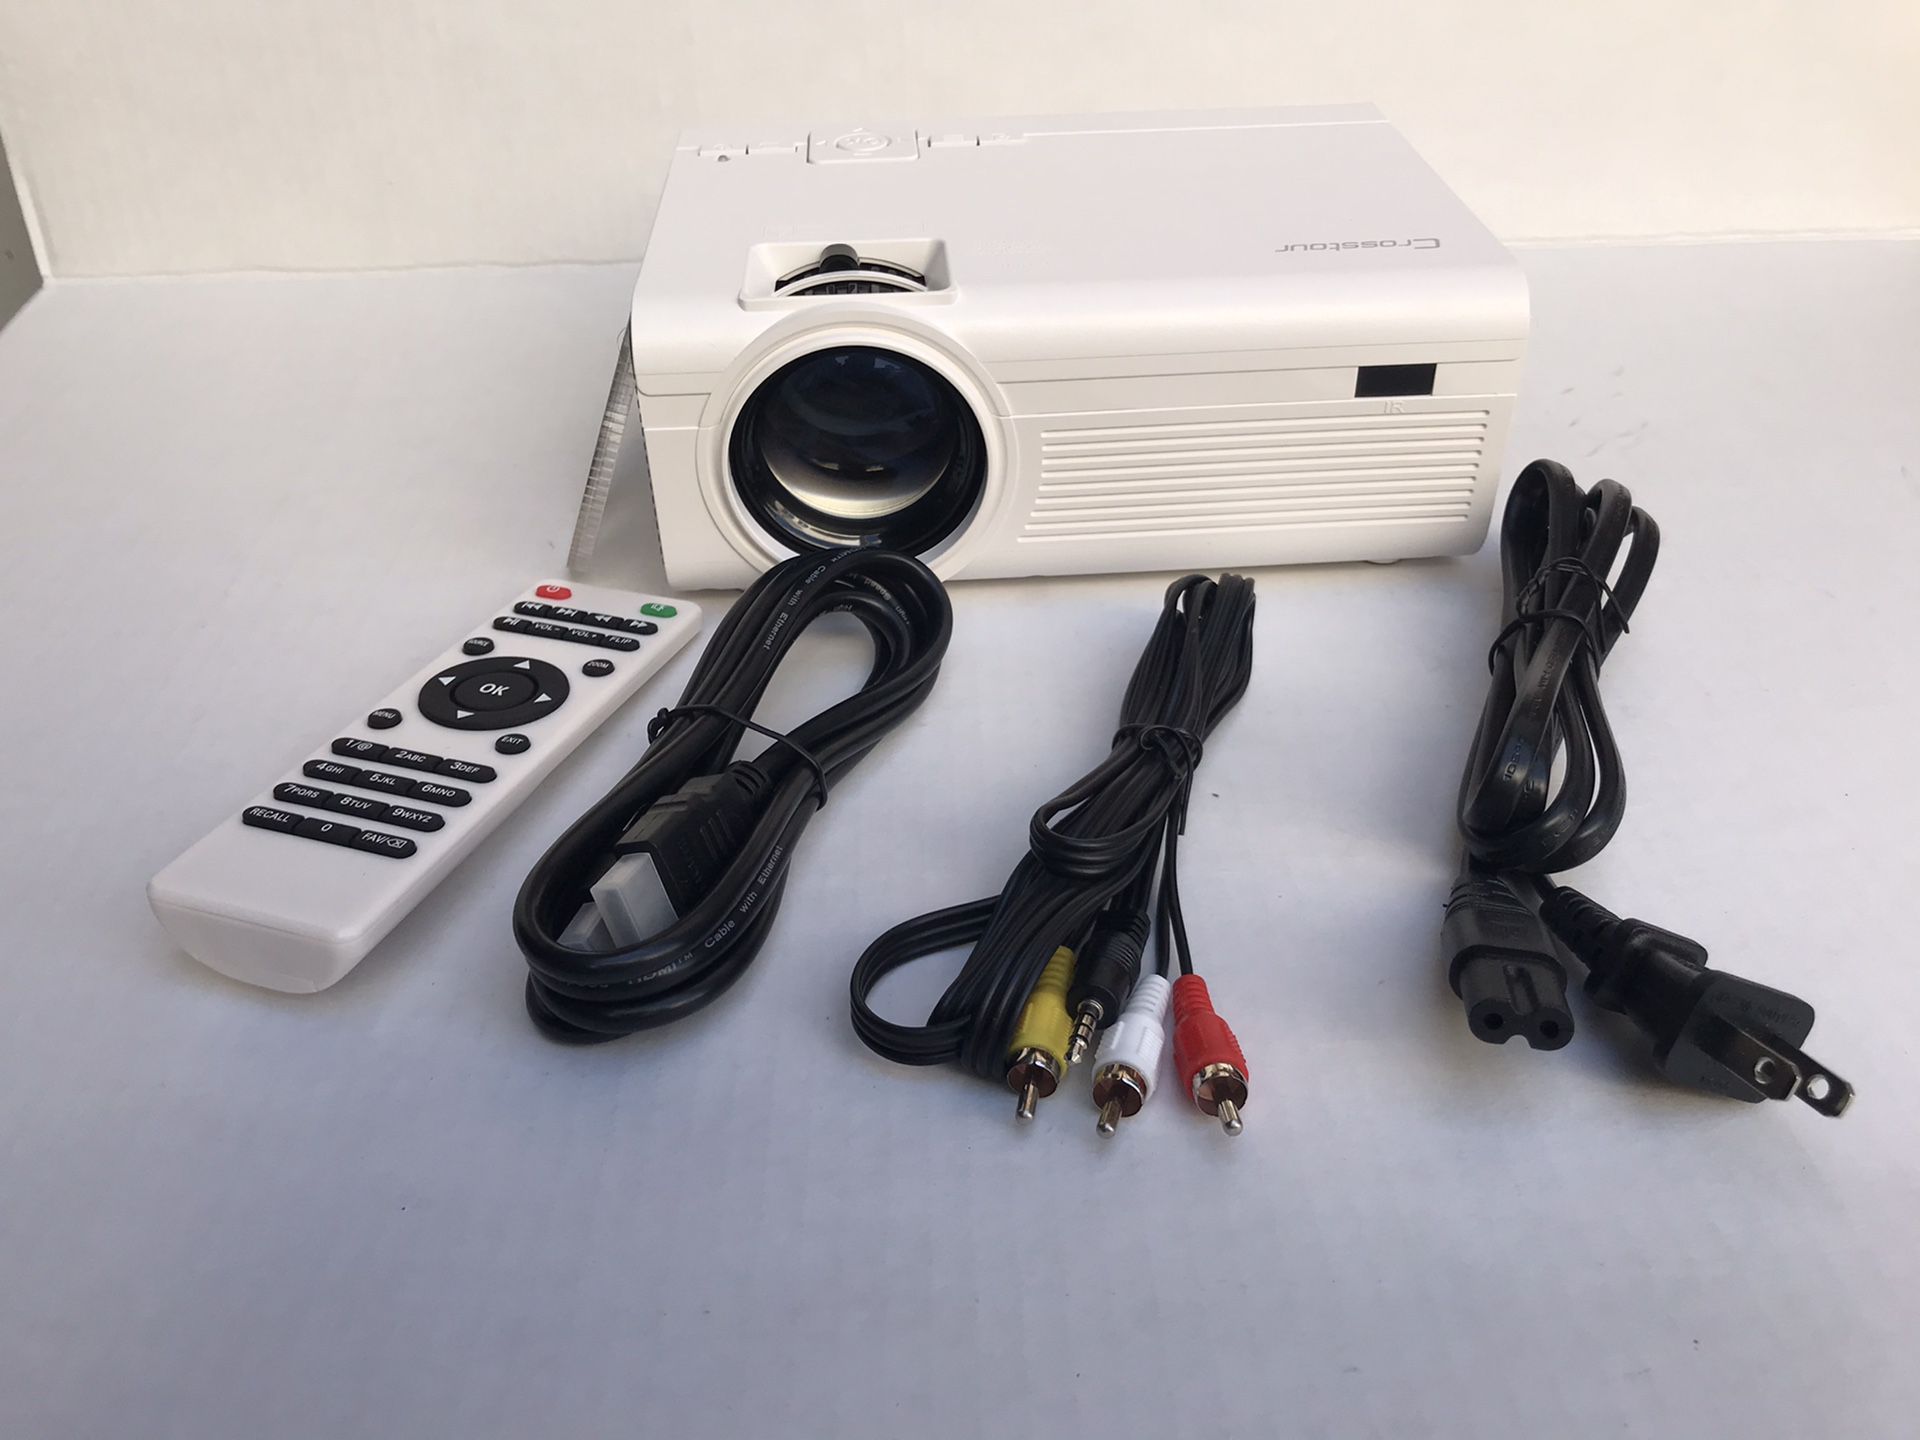 Mini LED Video Projector 1080P Supported, Crosstour HD Portable Projector